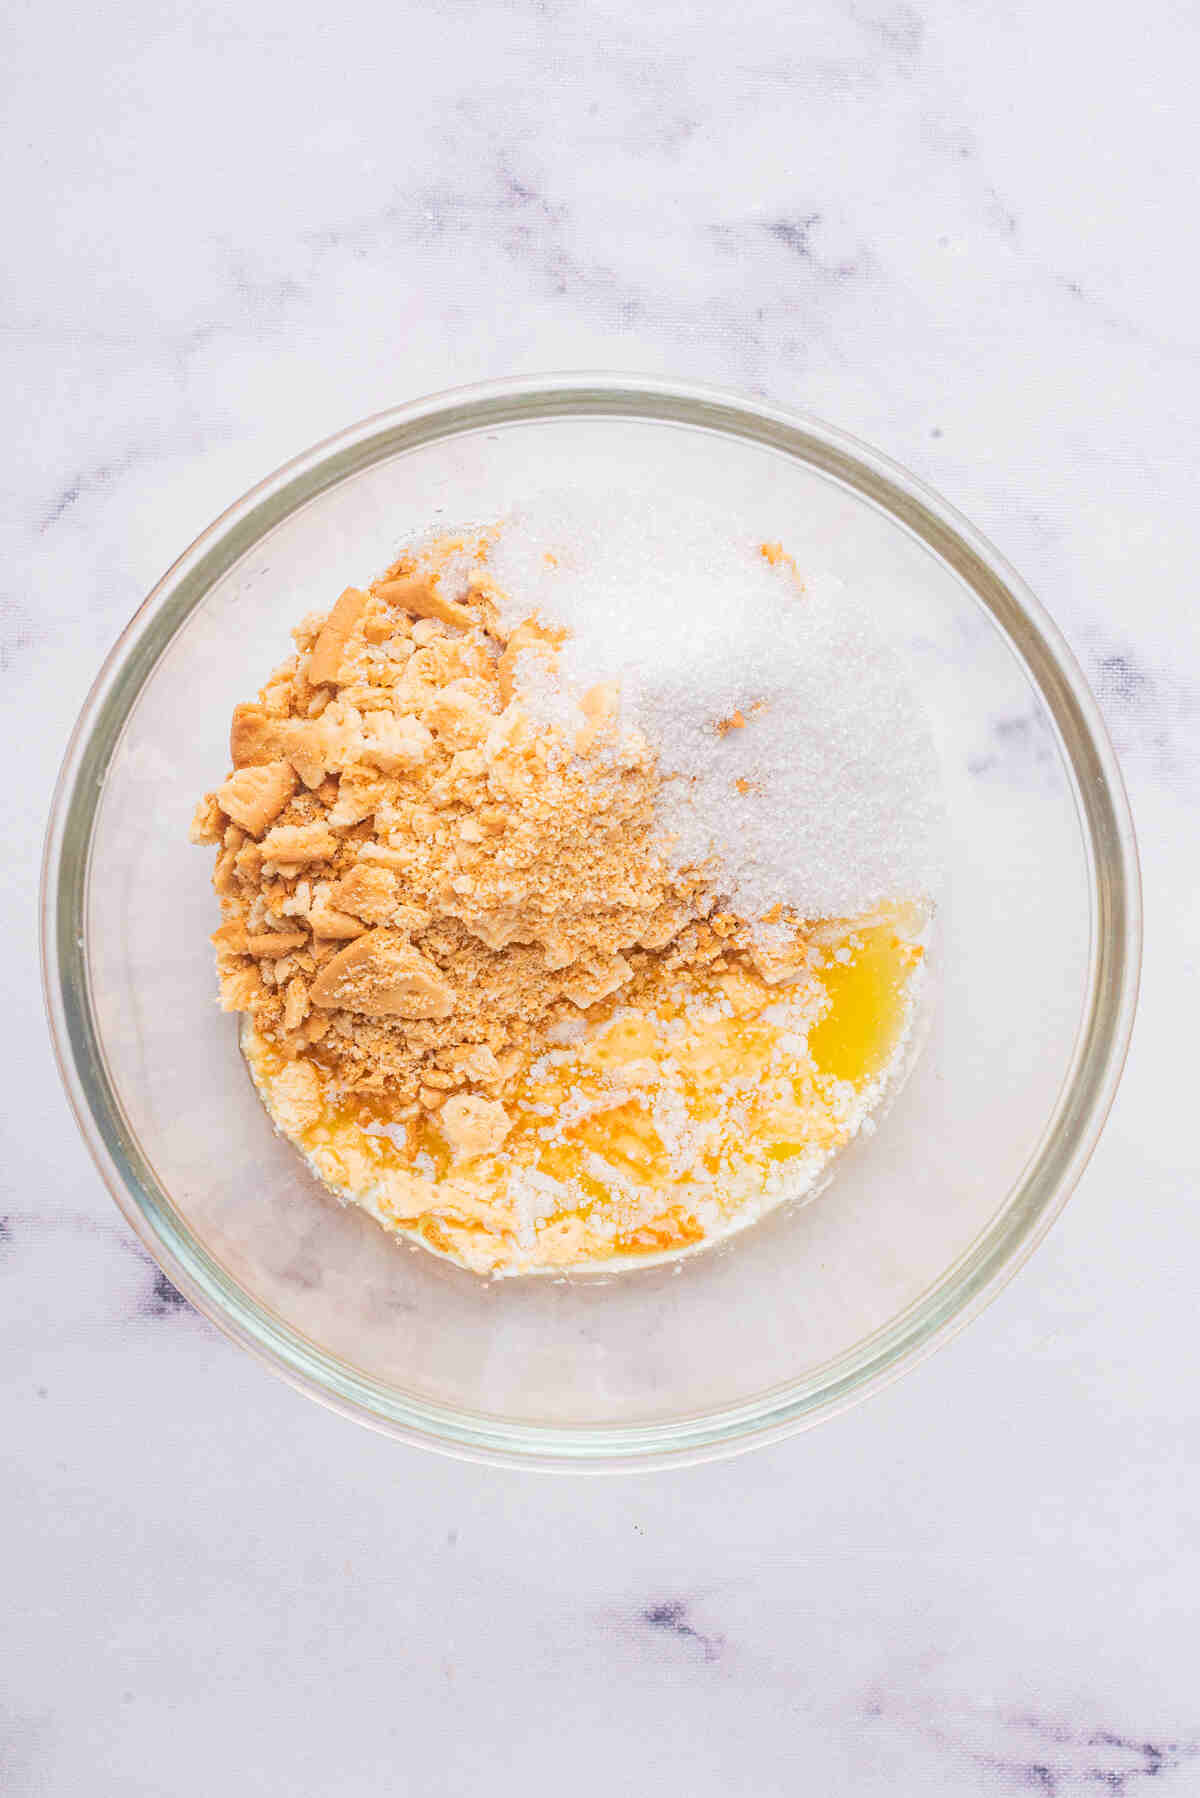 A mixing bowl containing graham cracker crumbs, sugar, and melted butter being stirred to form a base for ice cream.